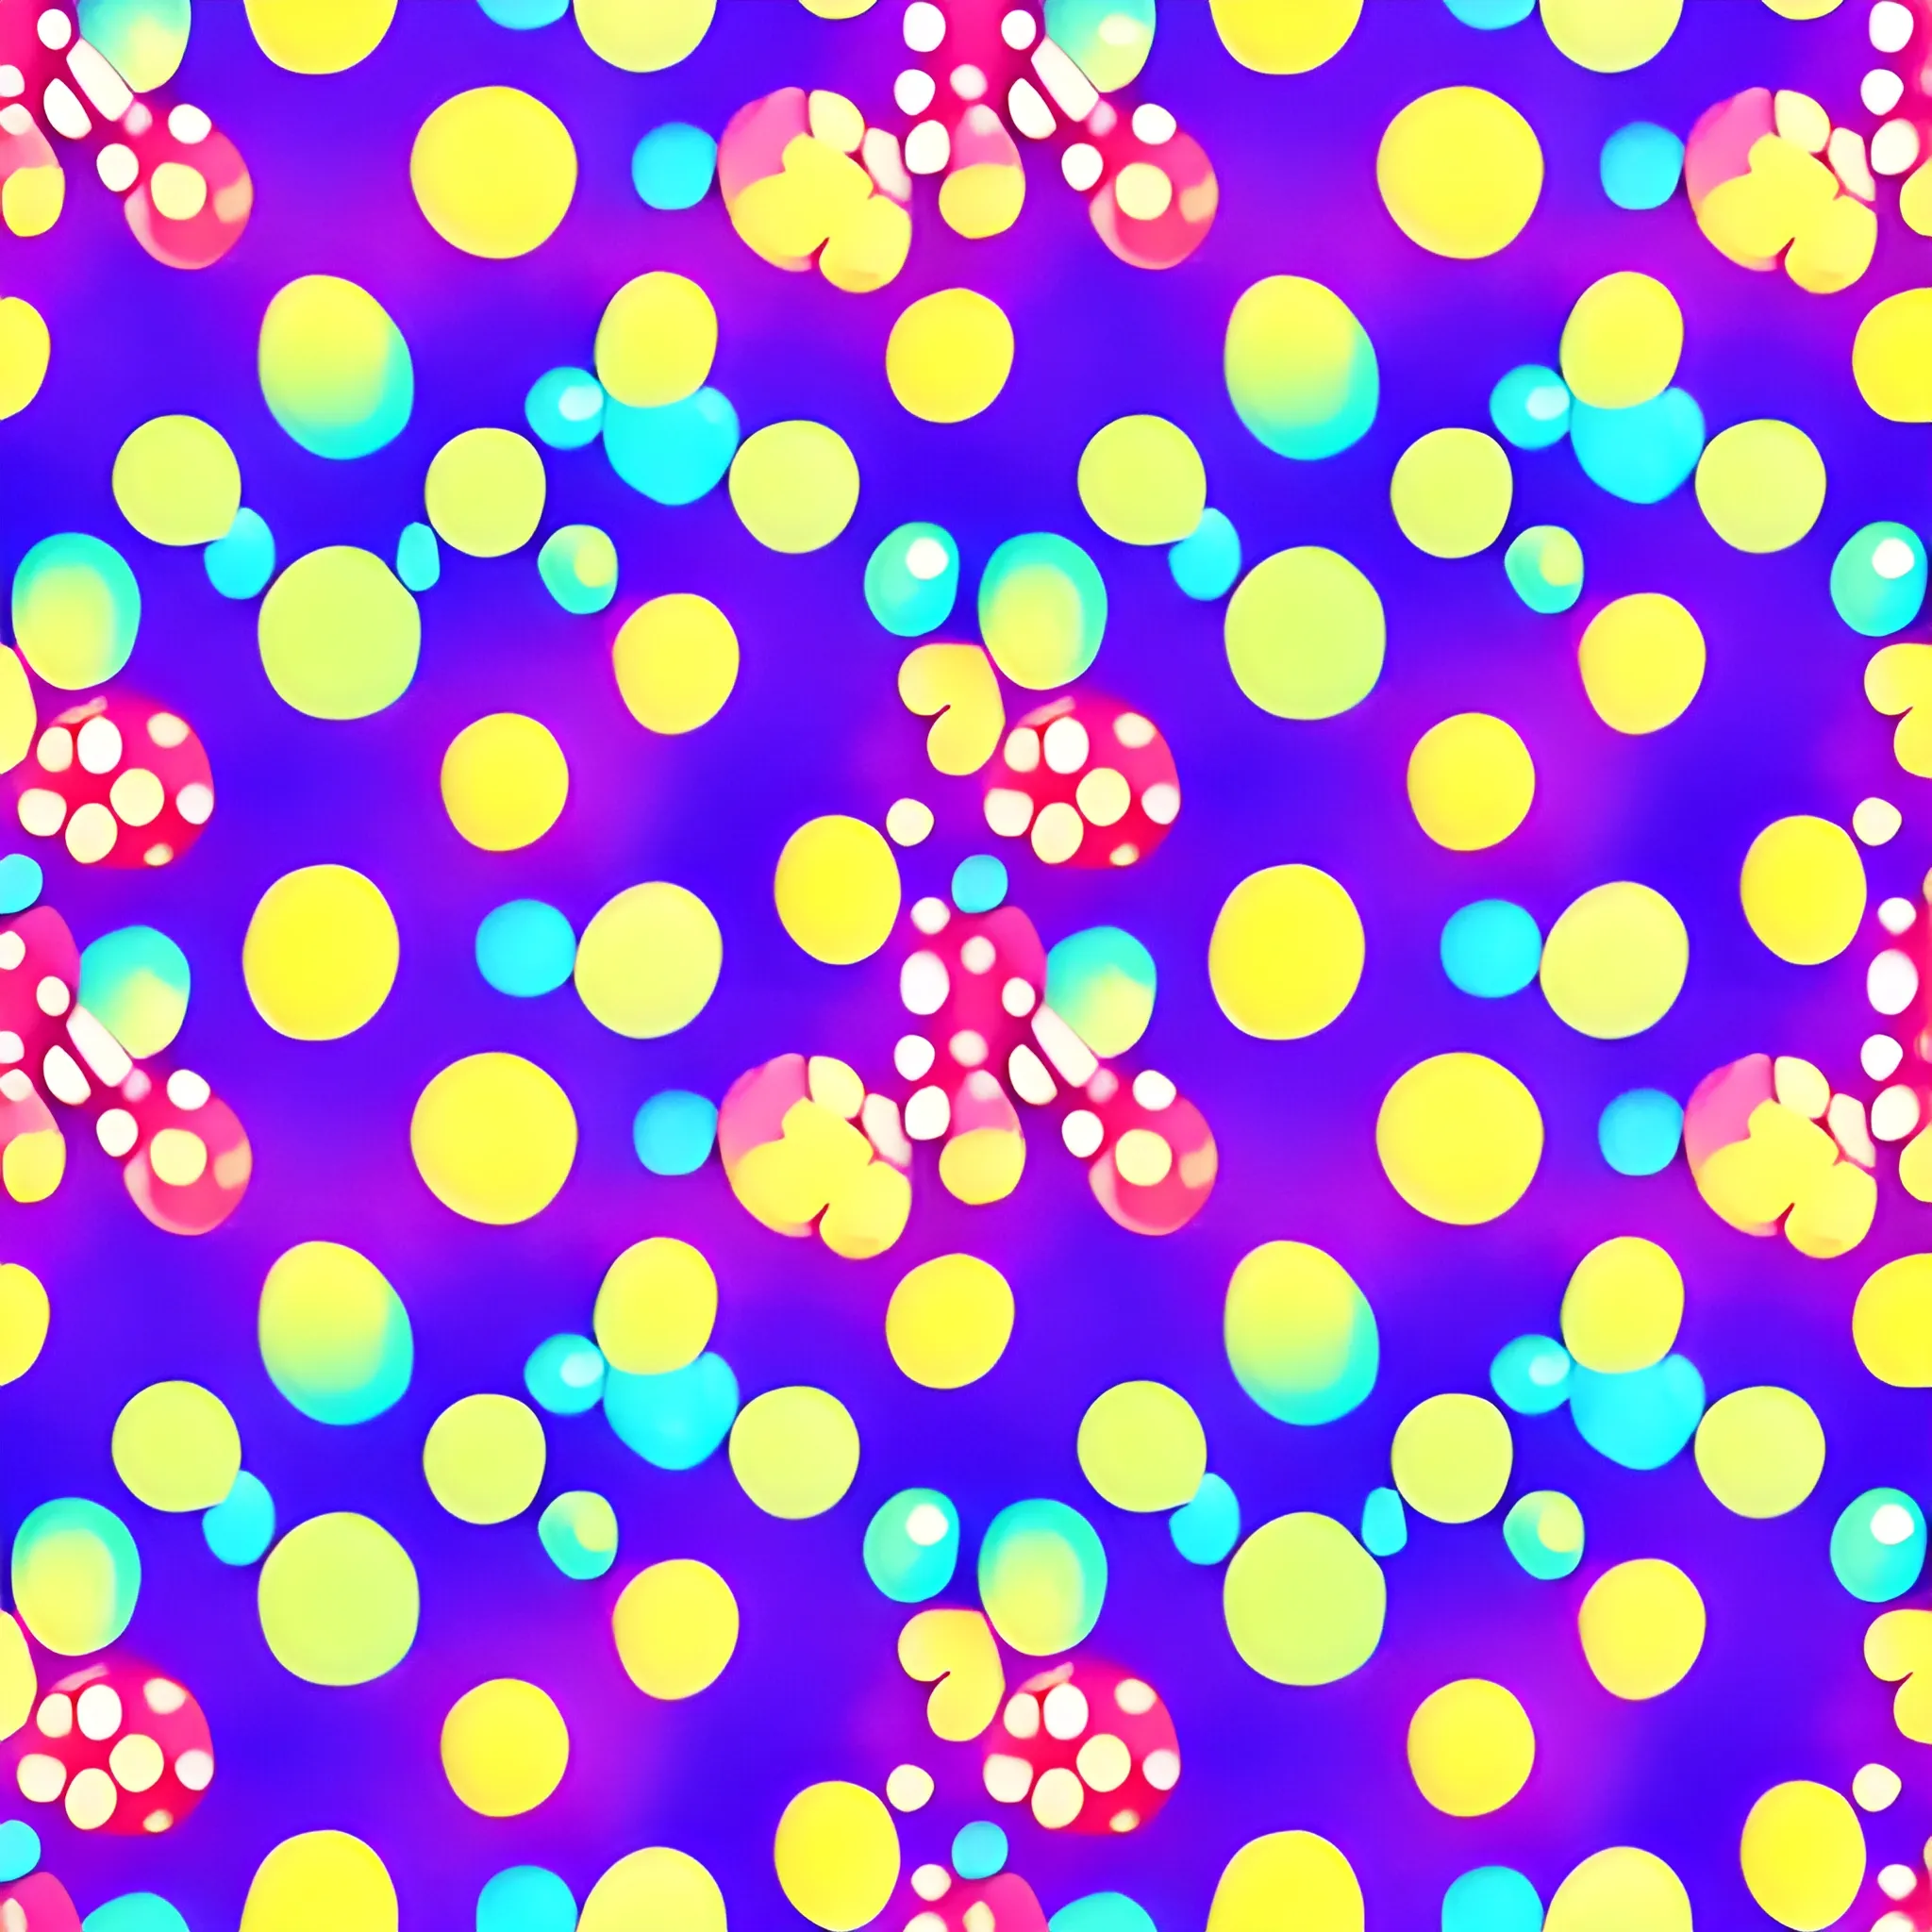 seamless pattern,Colourful, Digital, Dots, Marble, Multicolor, Ombre, Pastel, Polka dot, Romantic, Splats, Spring/summer, Stencil, Water Color, Pencil Sketch